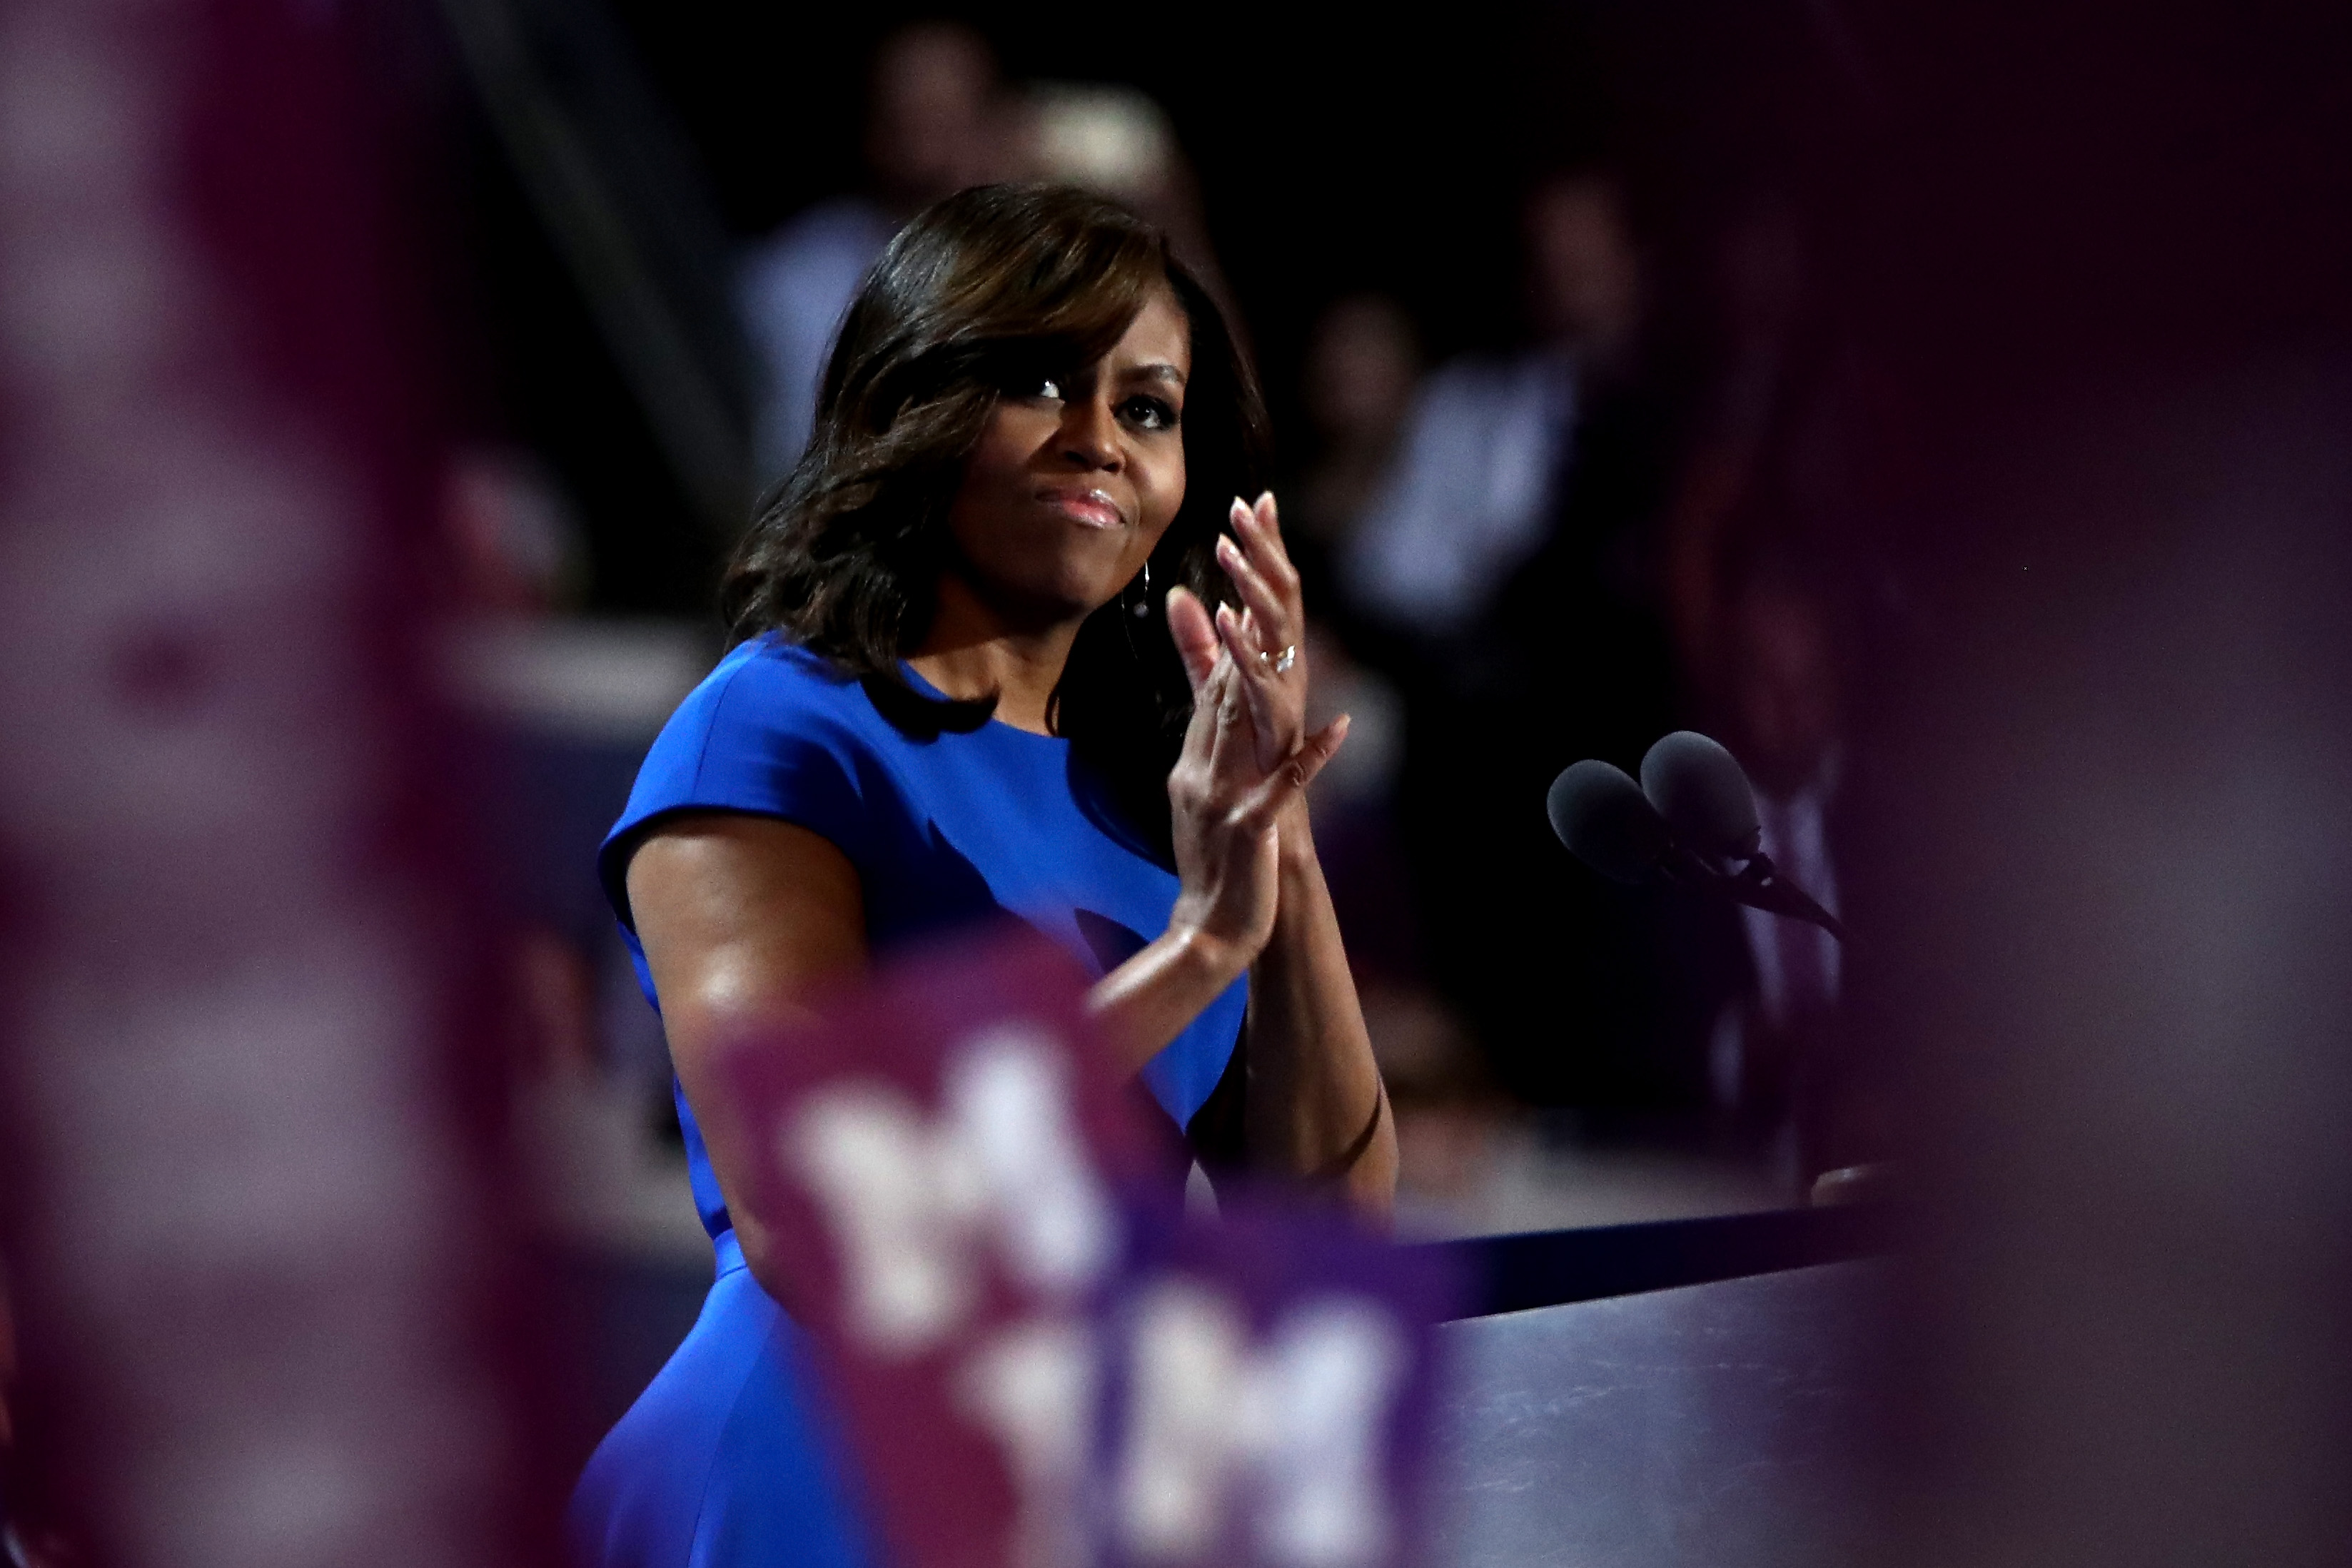 PHILADELPHIA, PA - JULY 25: First lady Michelle Obama acknowledges the crowd during her speech on the first day of the Democratic National Convention at the Wells Fargo Center, July 25, 2016 in Philadelphia, Pennsylvania. An estimated 50,000 people are expected in Philadelphia, including hundreds of protesters and members of the media. The four-day Democratic National Convention kicked off July 25. Jessica Kourkounis/Getty Images/AFP